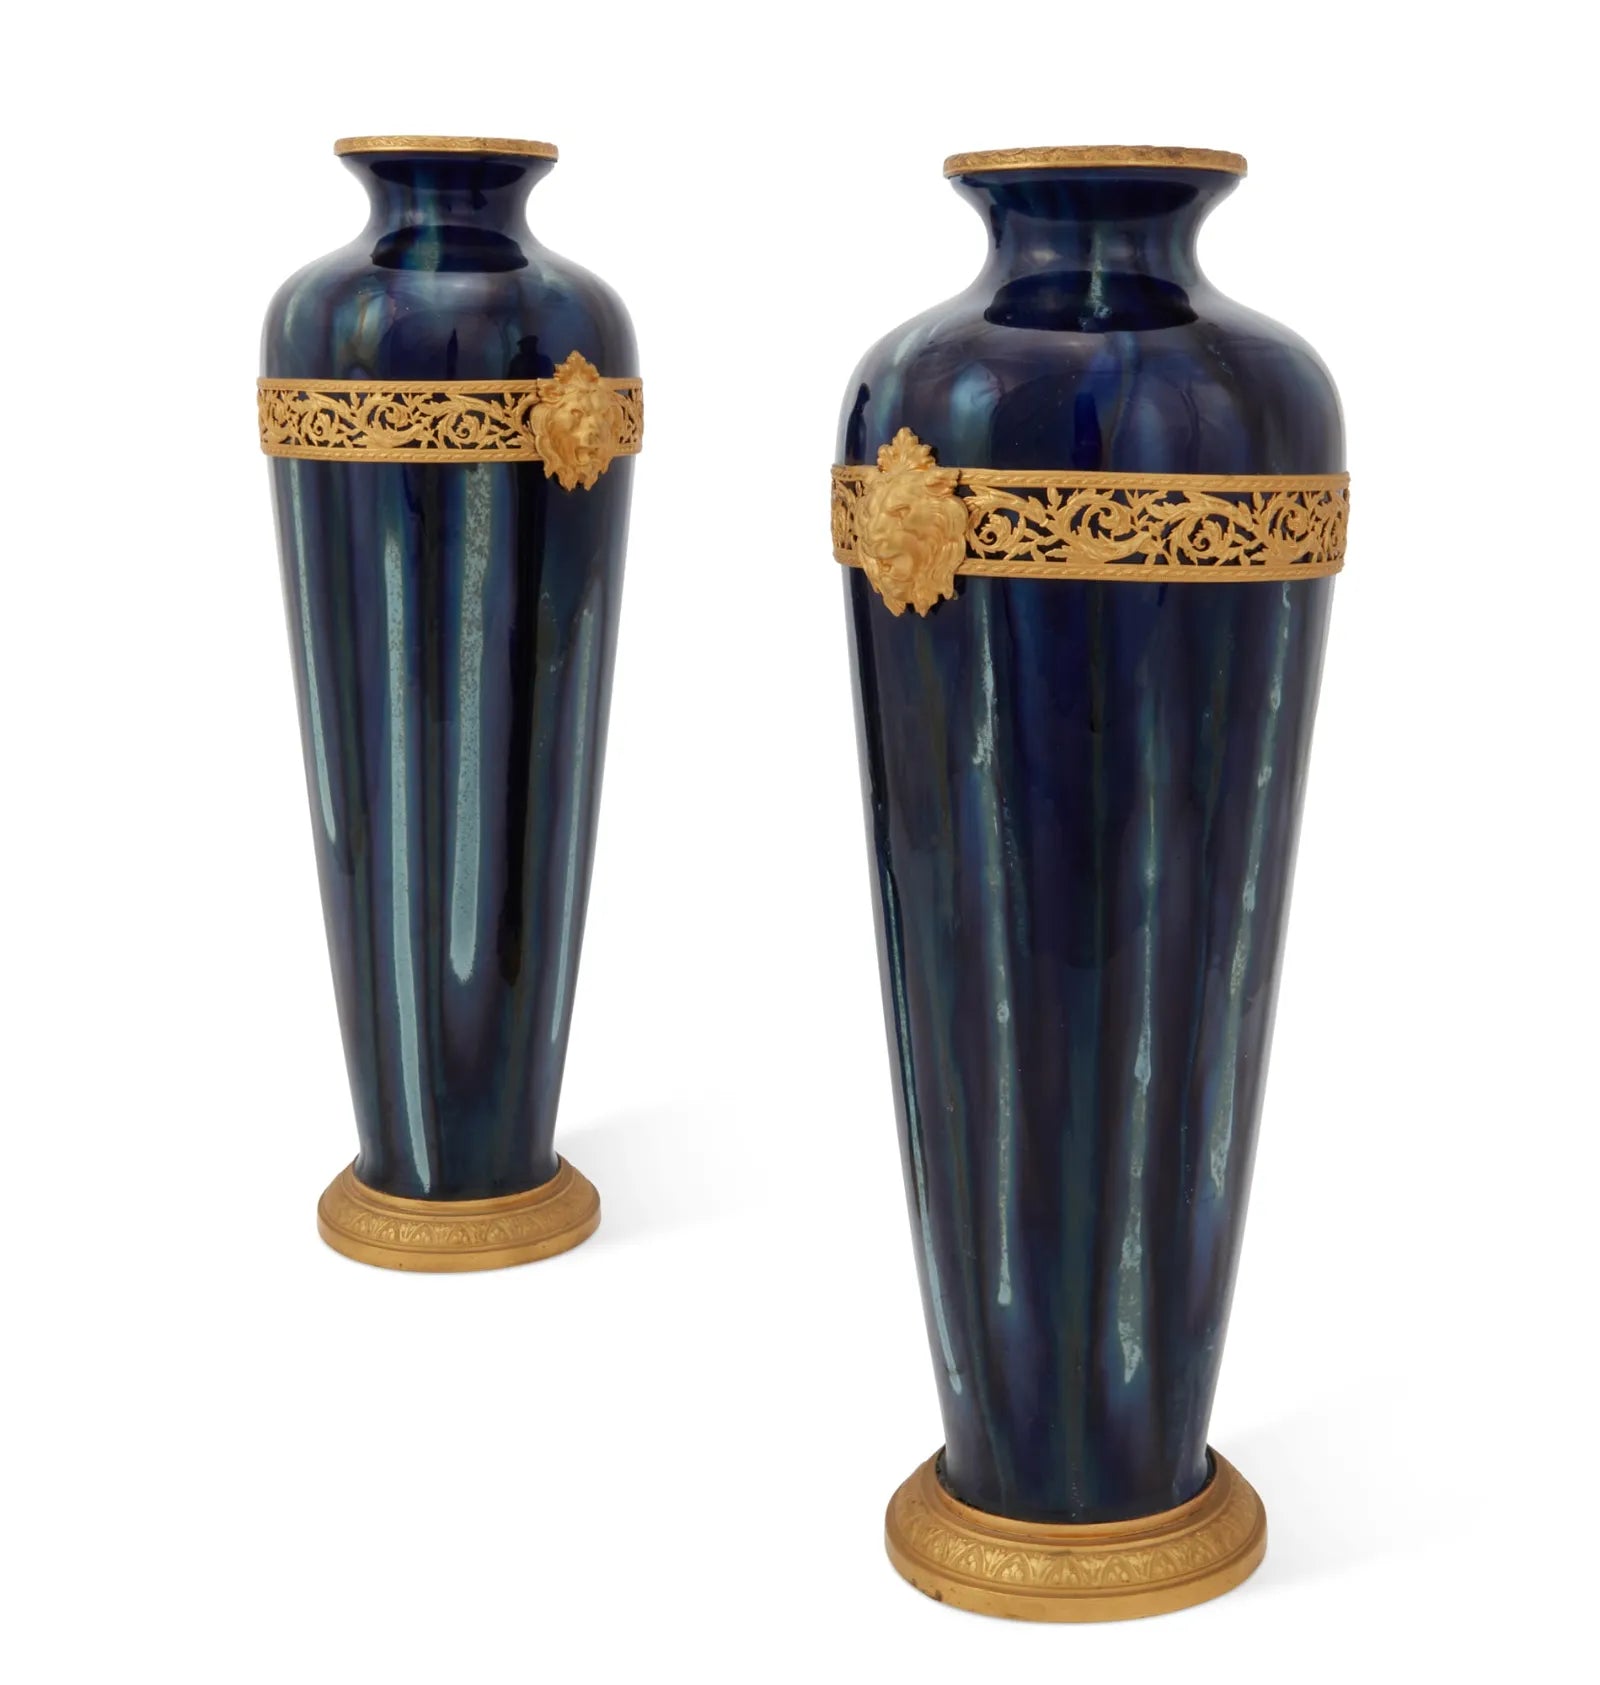 DA5-015: Pair of Late 19th C Pair of French Cobalt Flambe Glazed Pottery Vases w/ Gilt Bronze Mounts